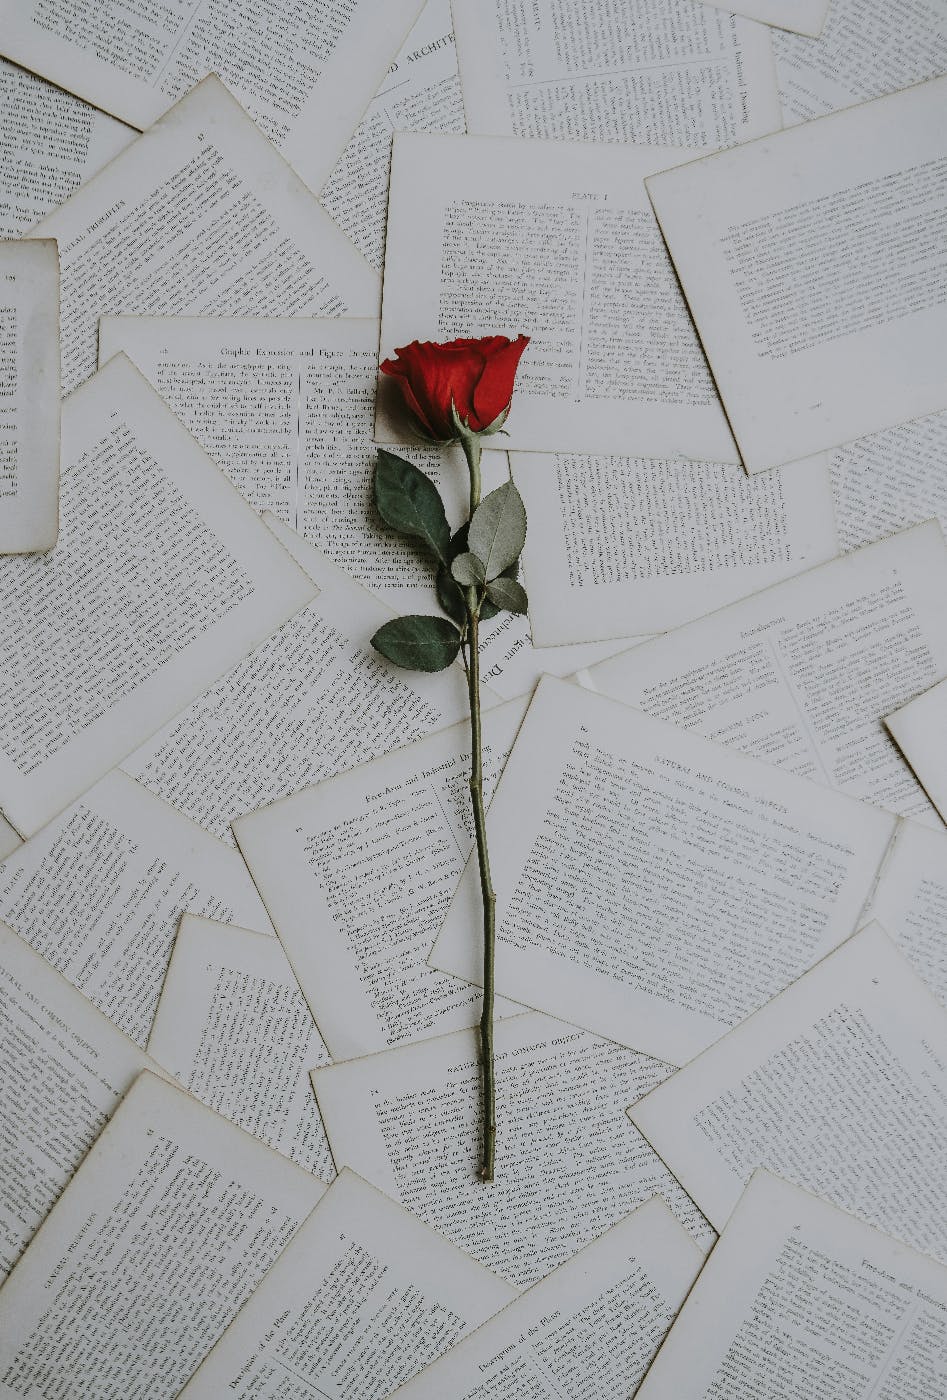 A single long stem red rose laying on hundreds of scattered sheets of pages from poems, plays and fiction.